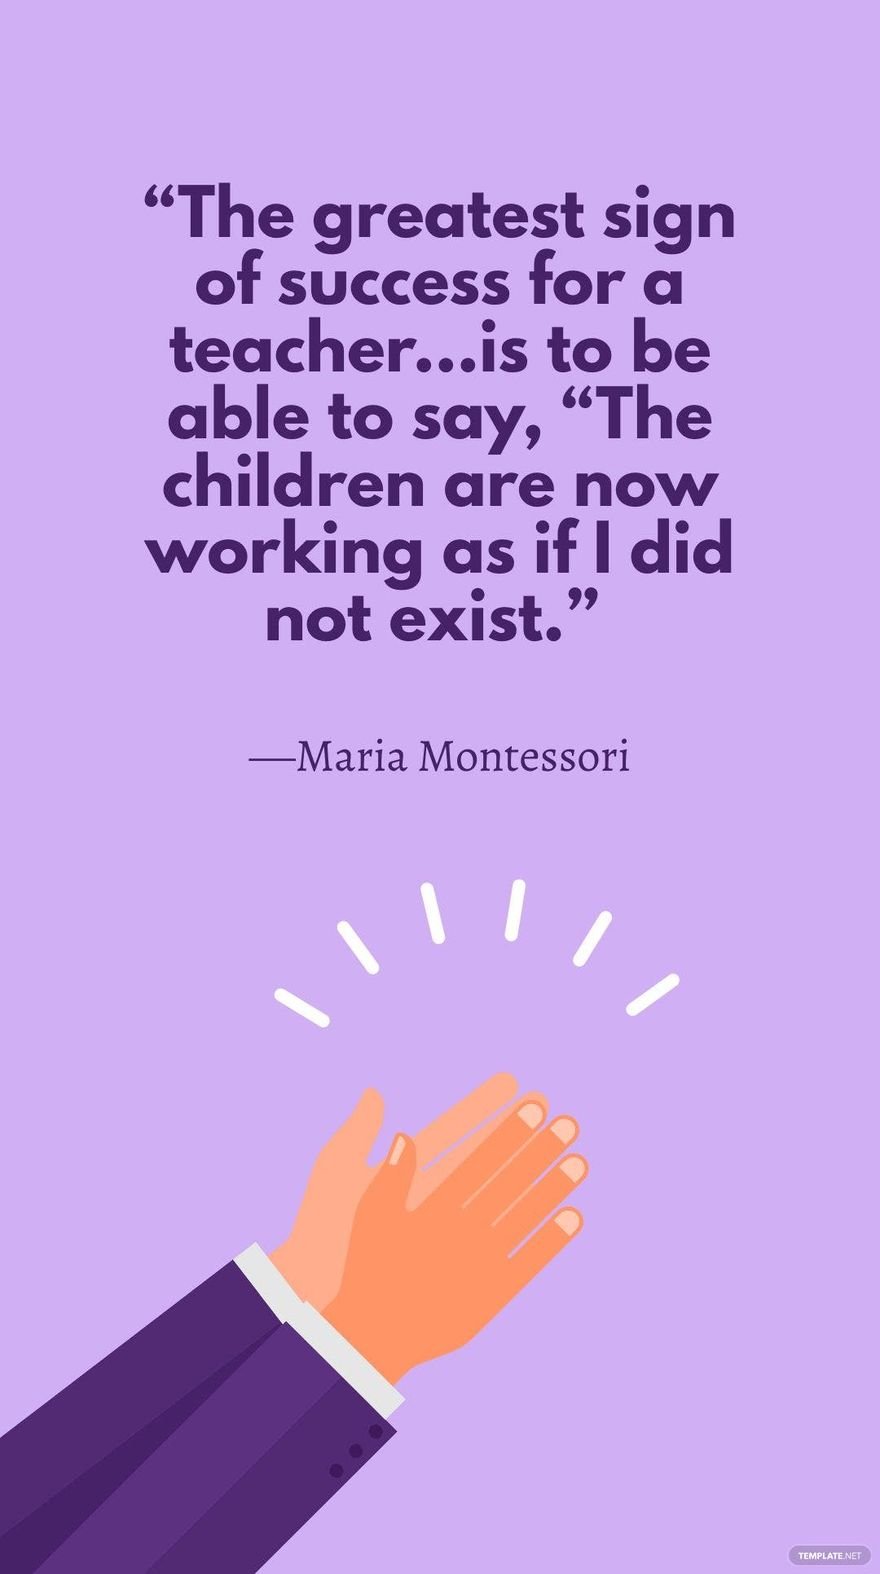 Maria Montessori - The greatest sign of success for a teacher…is to be able to say, “The children are now working as if I did not exist. in JPG